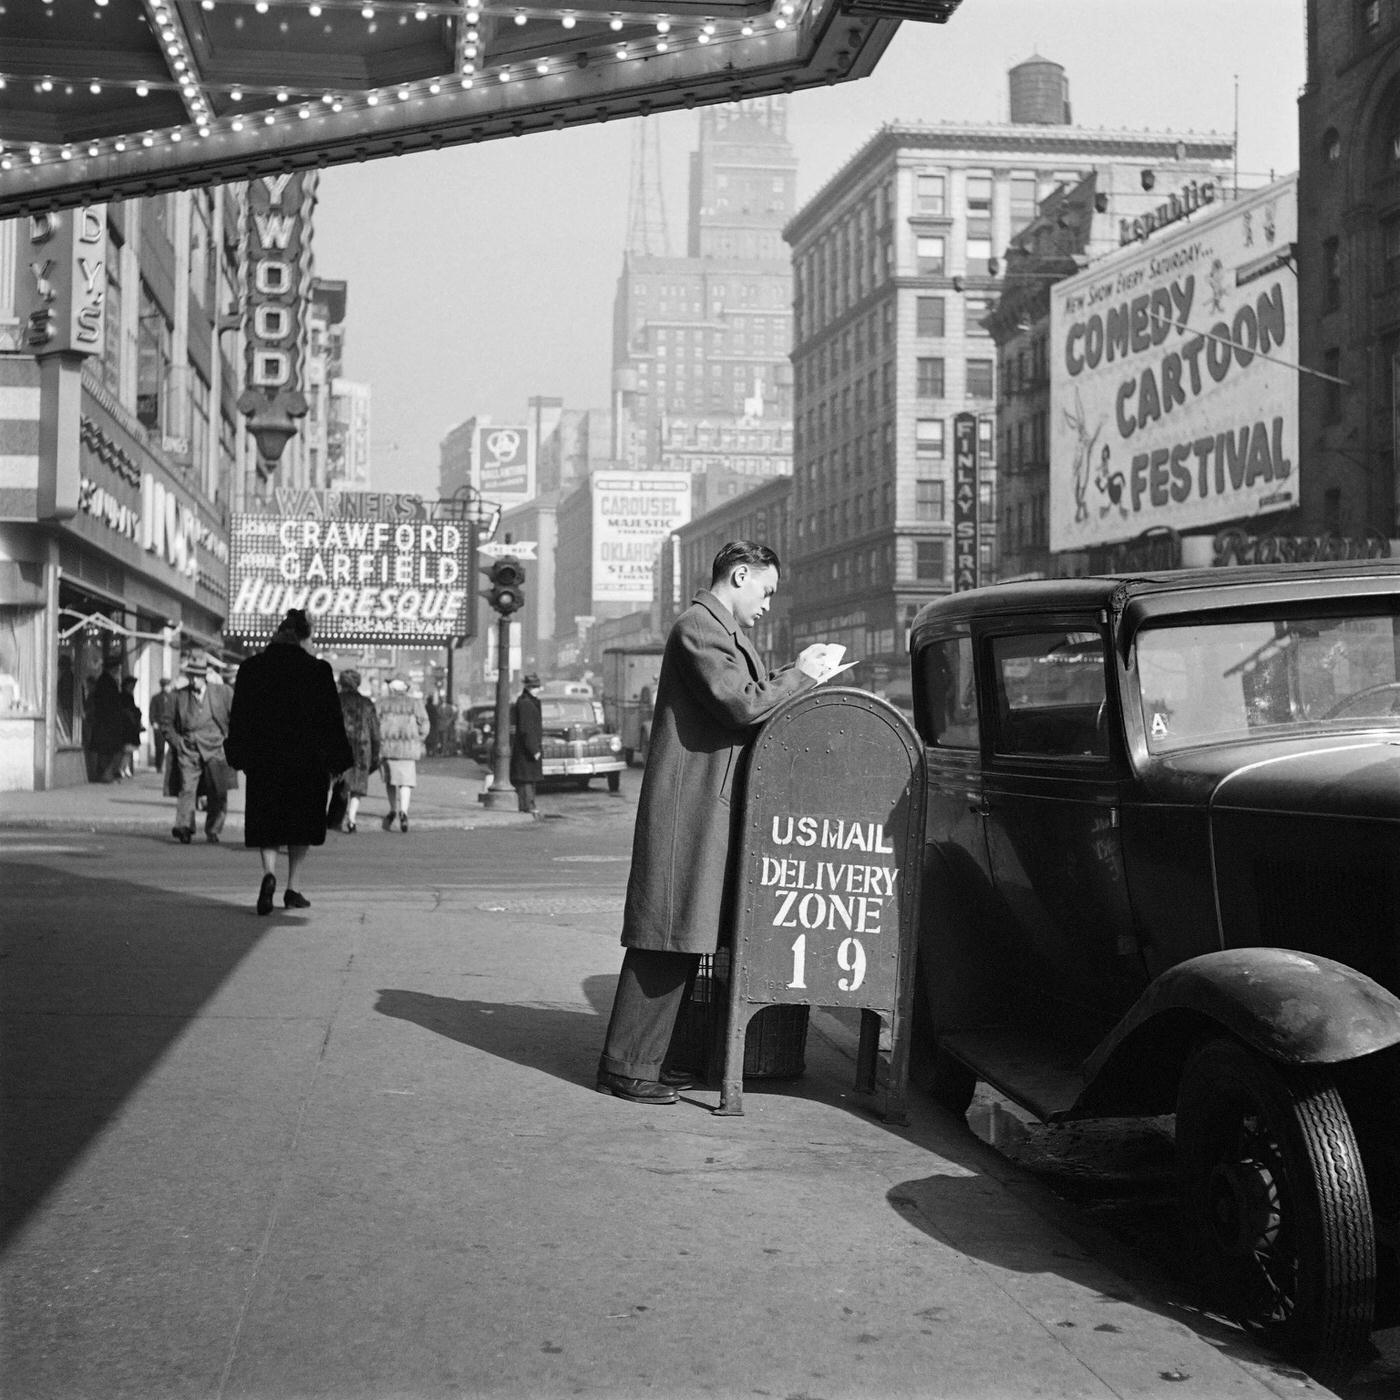 A Man Prepares Mail In Front Of The Capitol Theater Near Lindy'S Restaurant, Manhattan, 1947